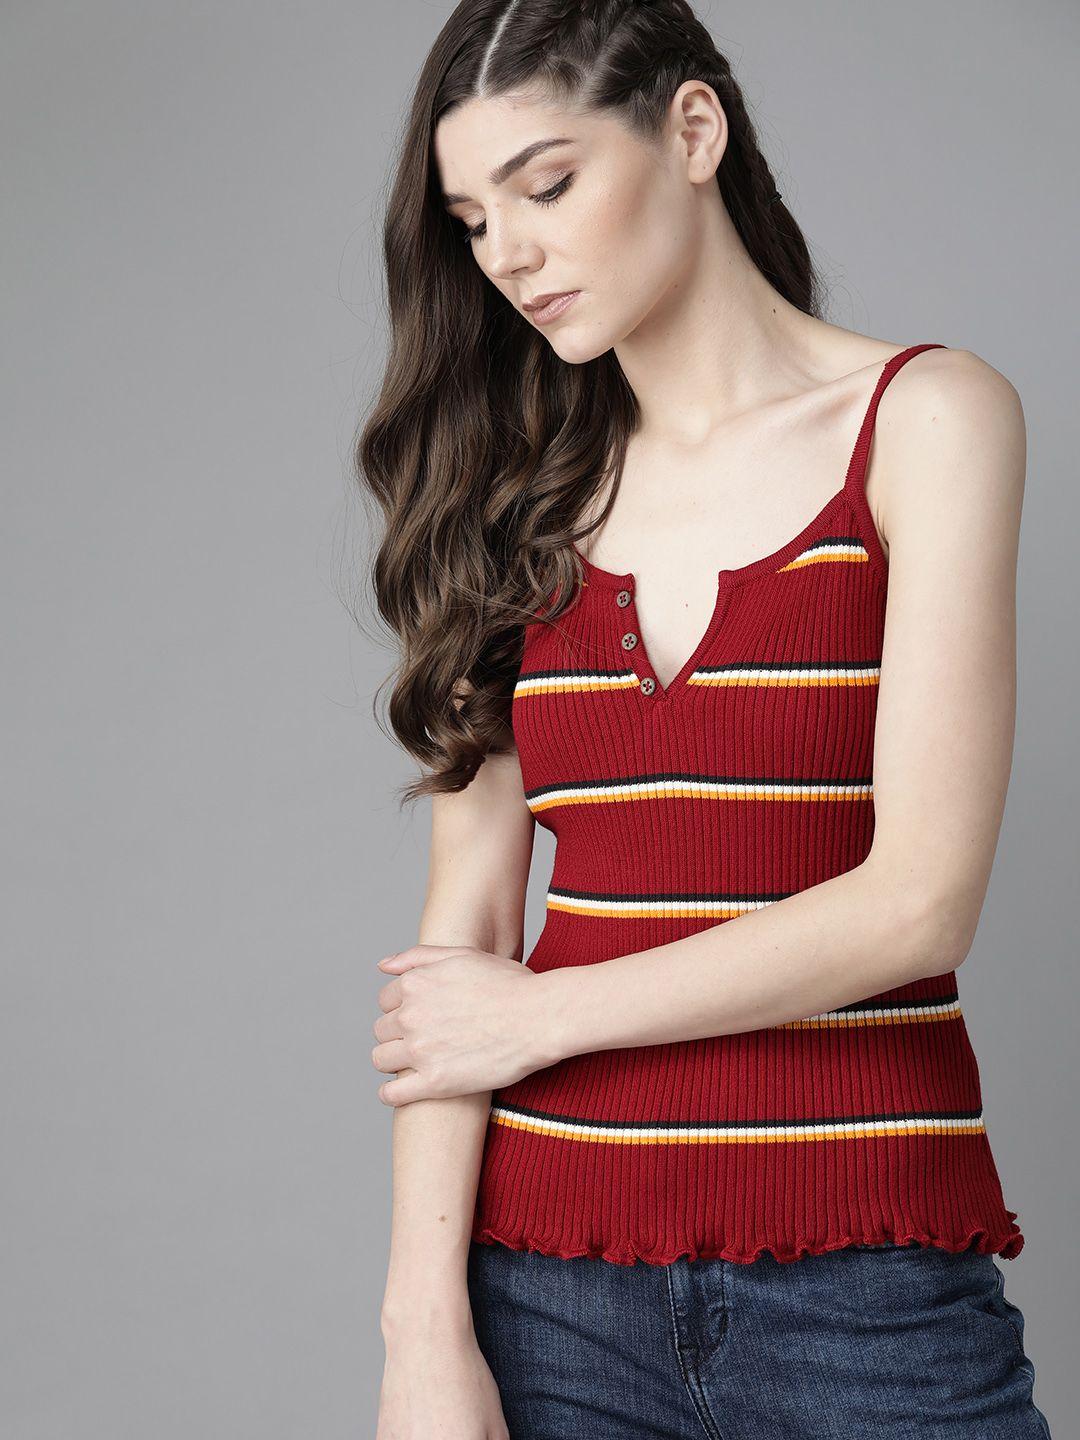 the roadster lifestyle co maroon & white self-striped ribbed split neck with shoulder straps top